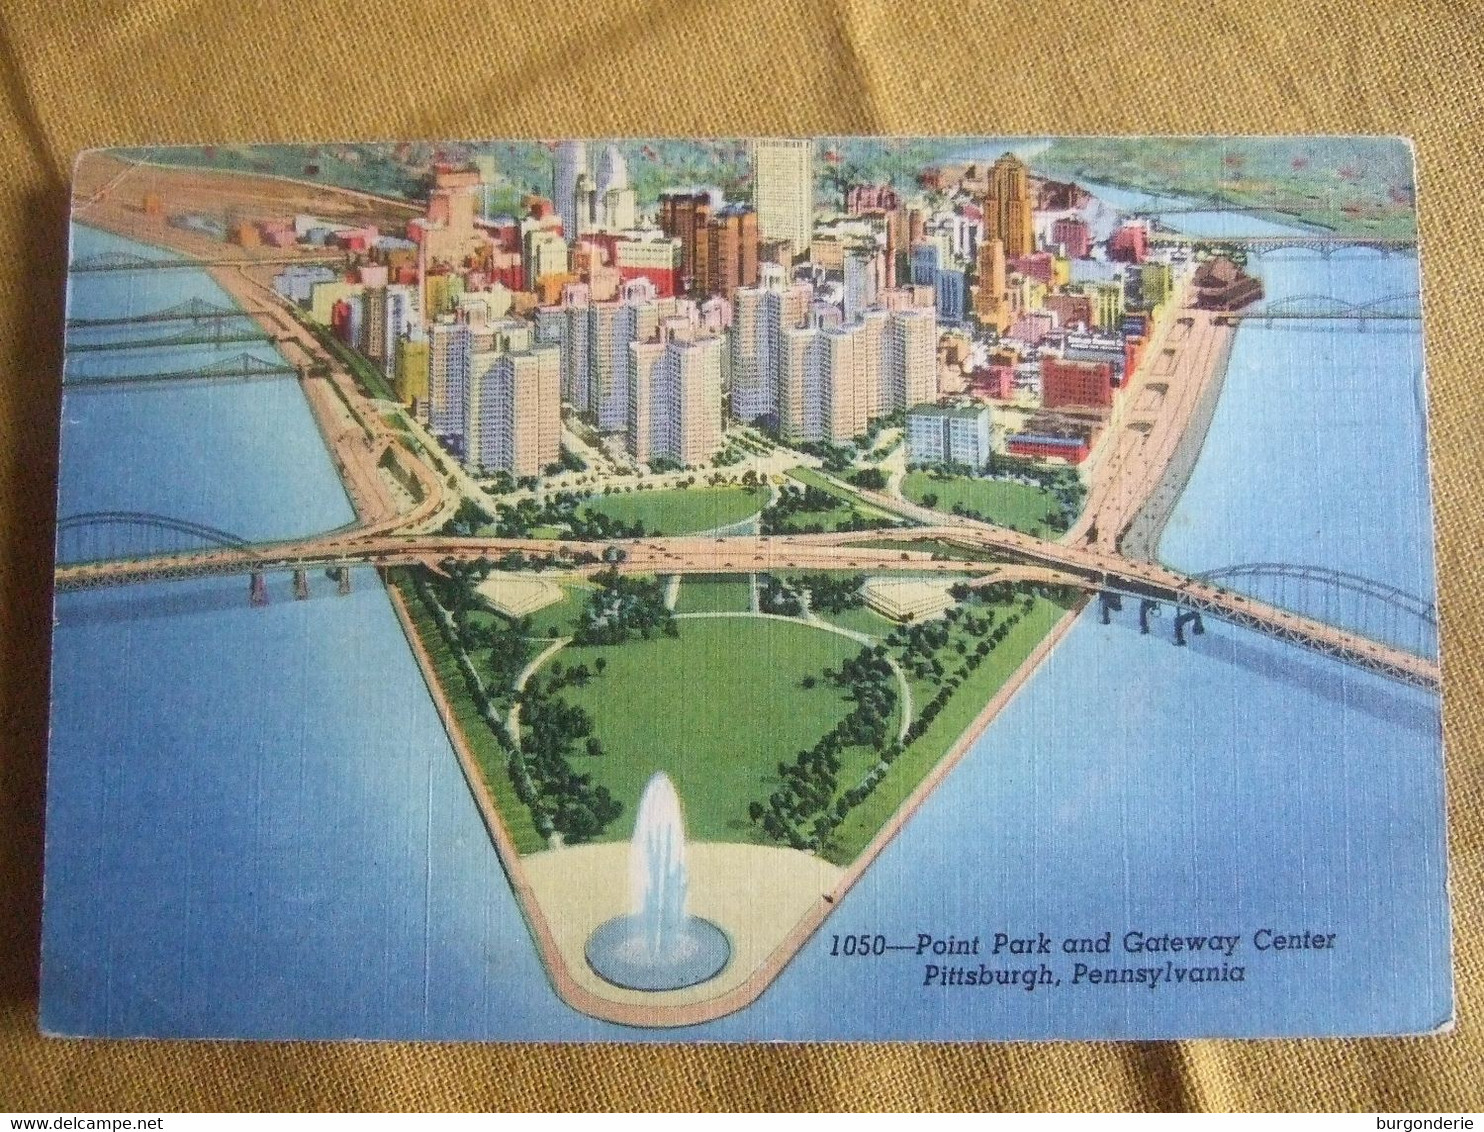 PITTSBURGH / POINT PARK AND GATEWAY CENTER / BELLE CARTE  / 1954 - Pittsburgh